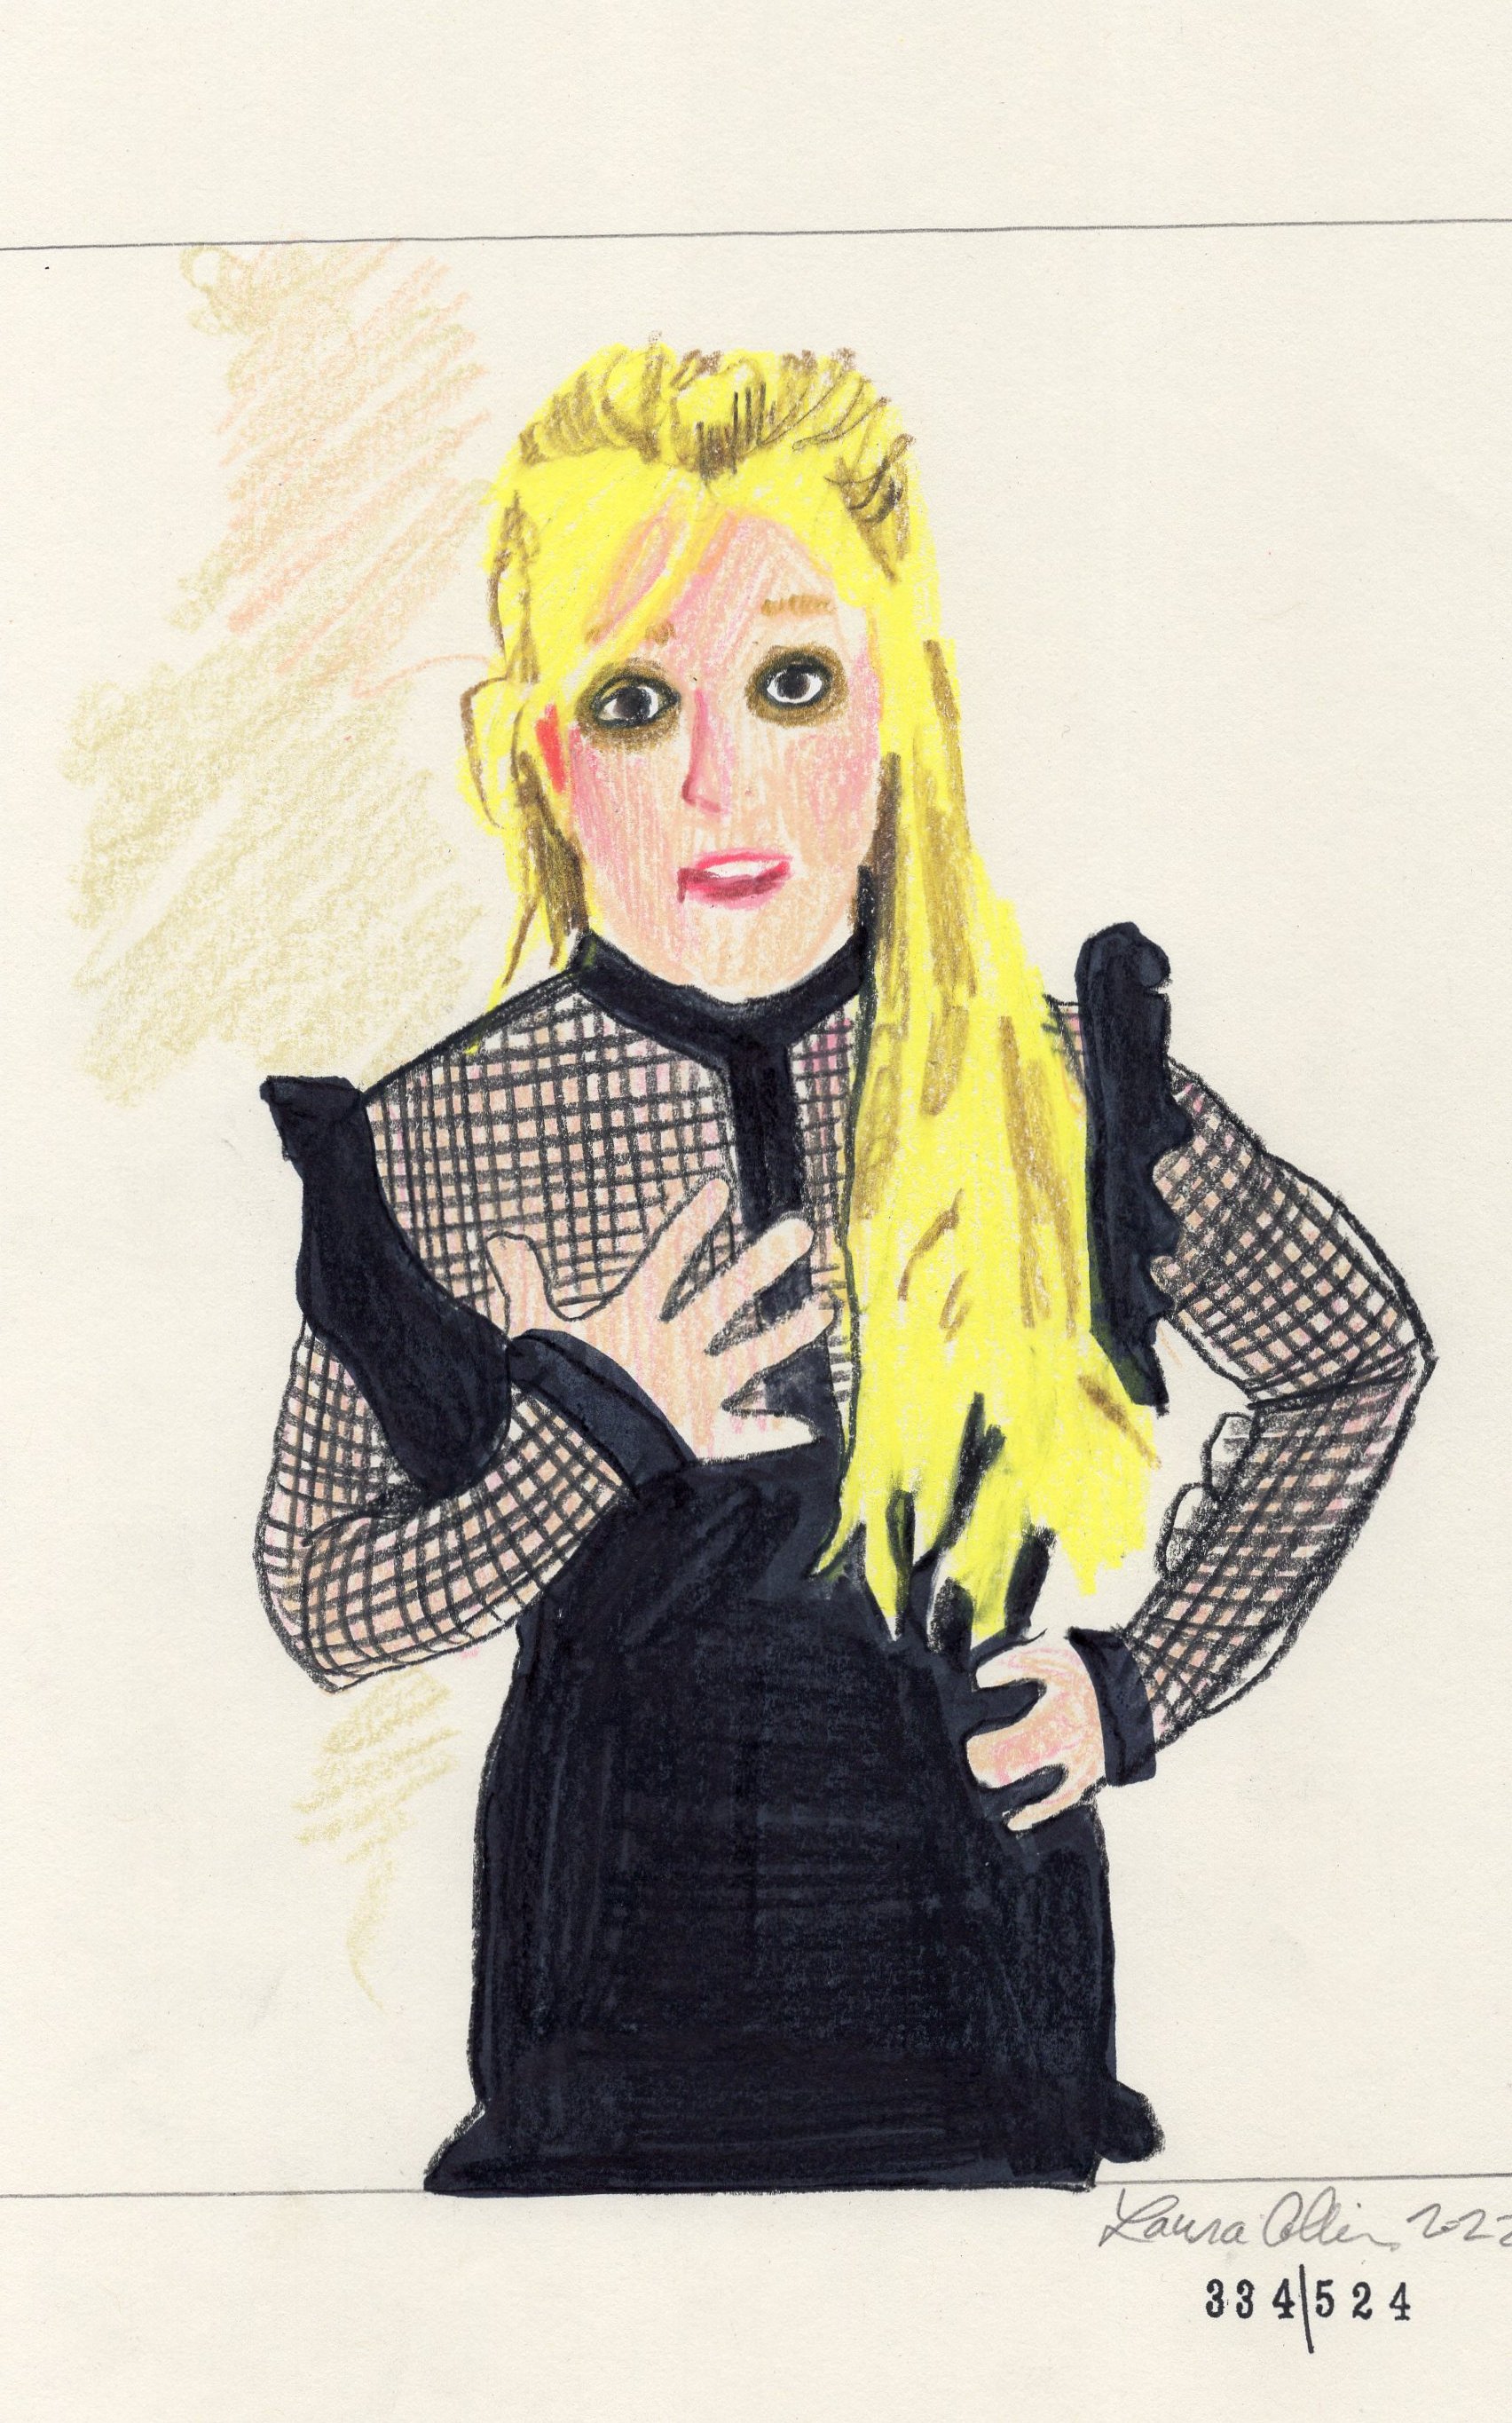 Laura Collins Britney Spears Animation 6x9in mixed media 2022 no334.jpg